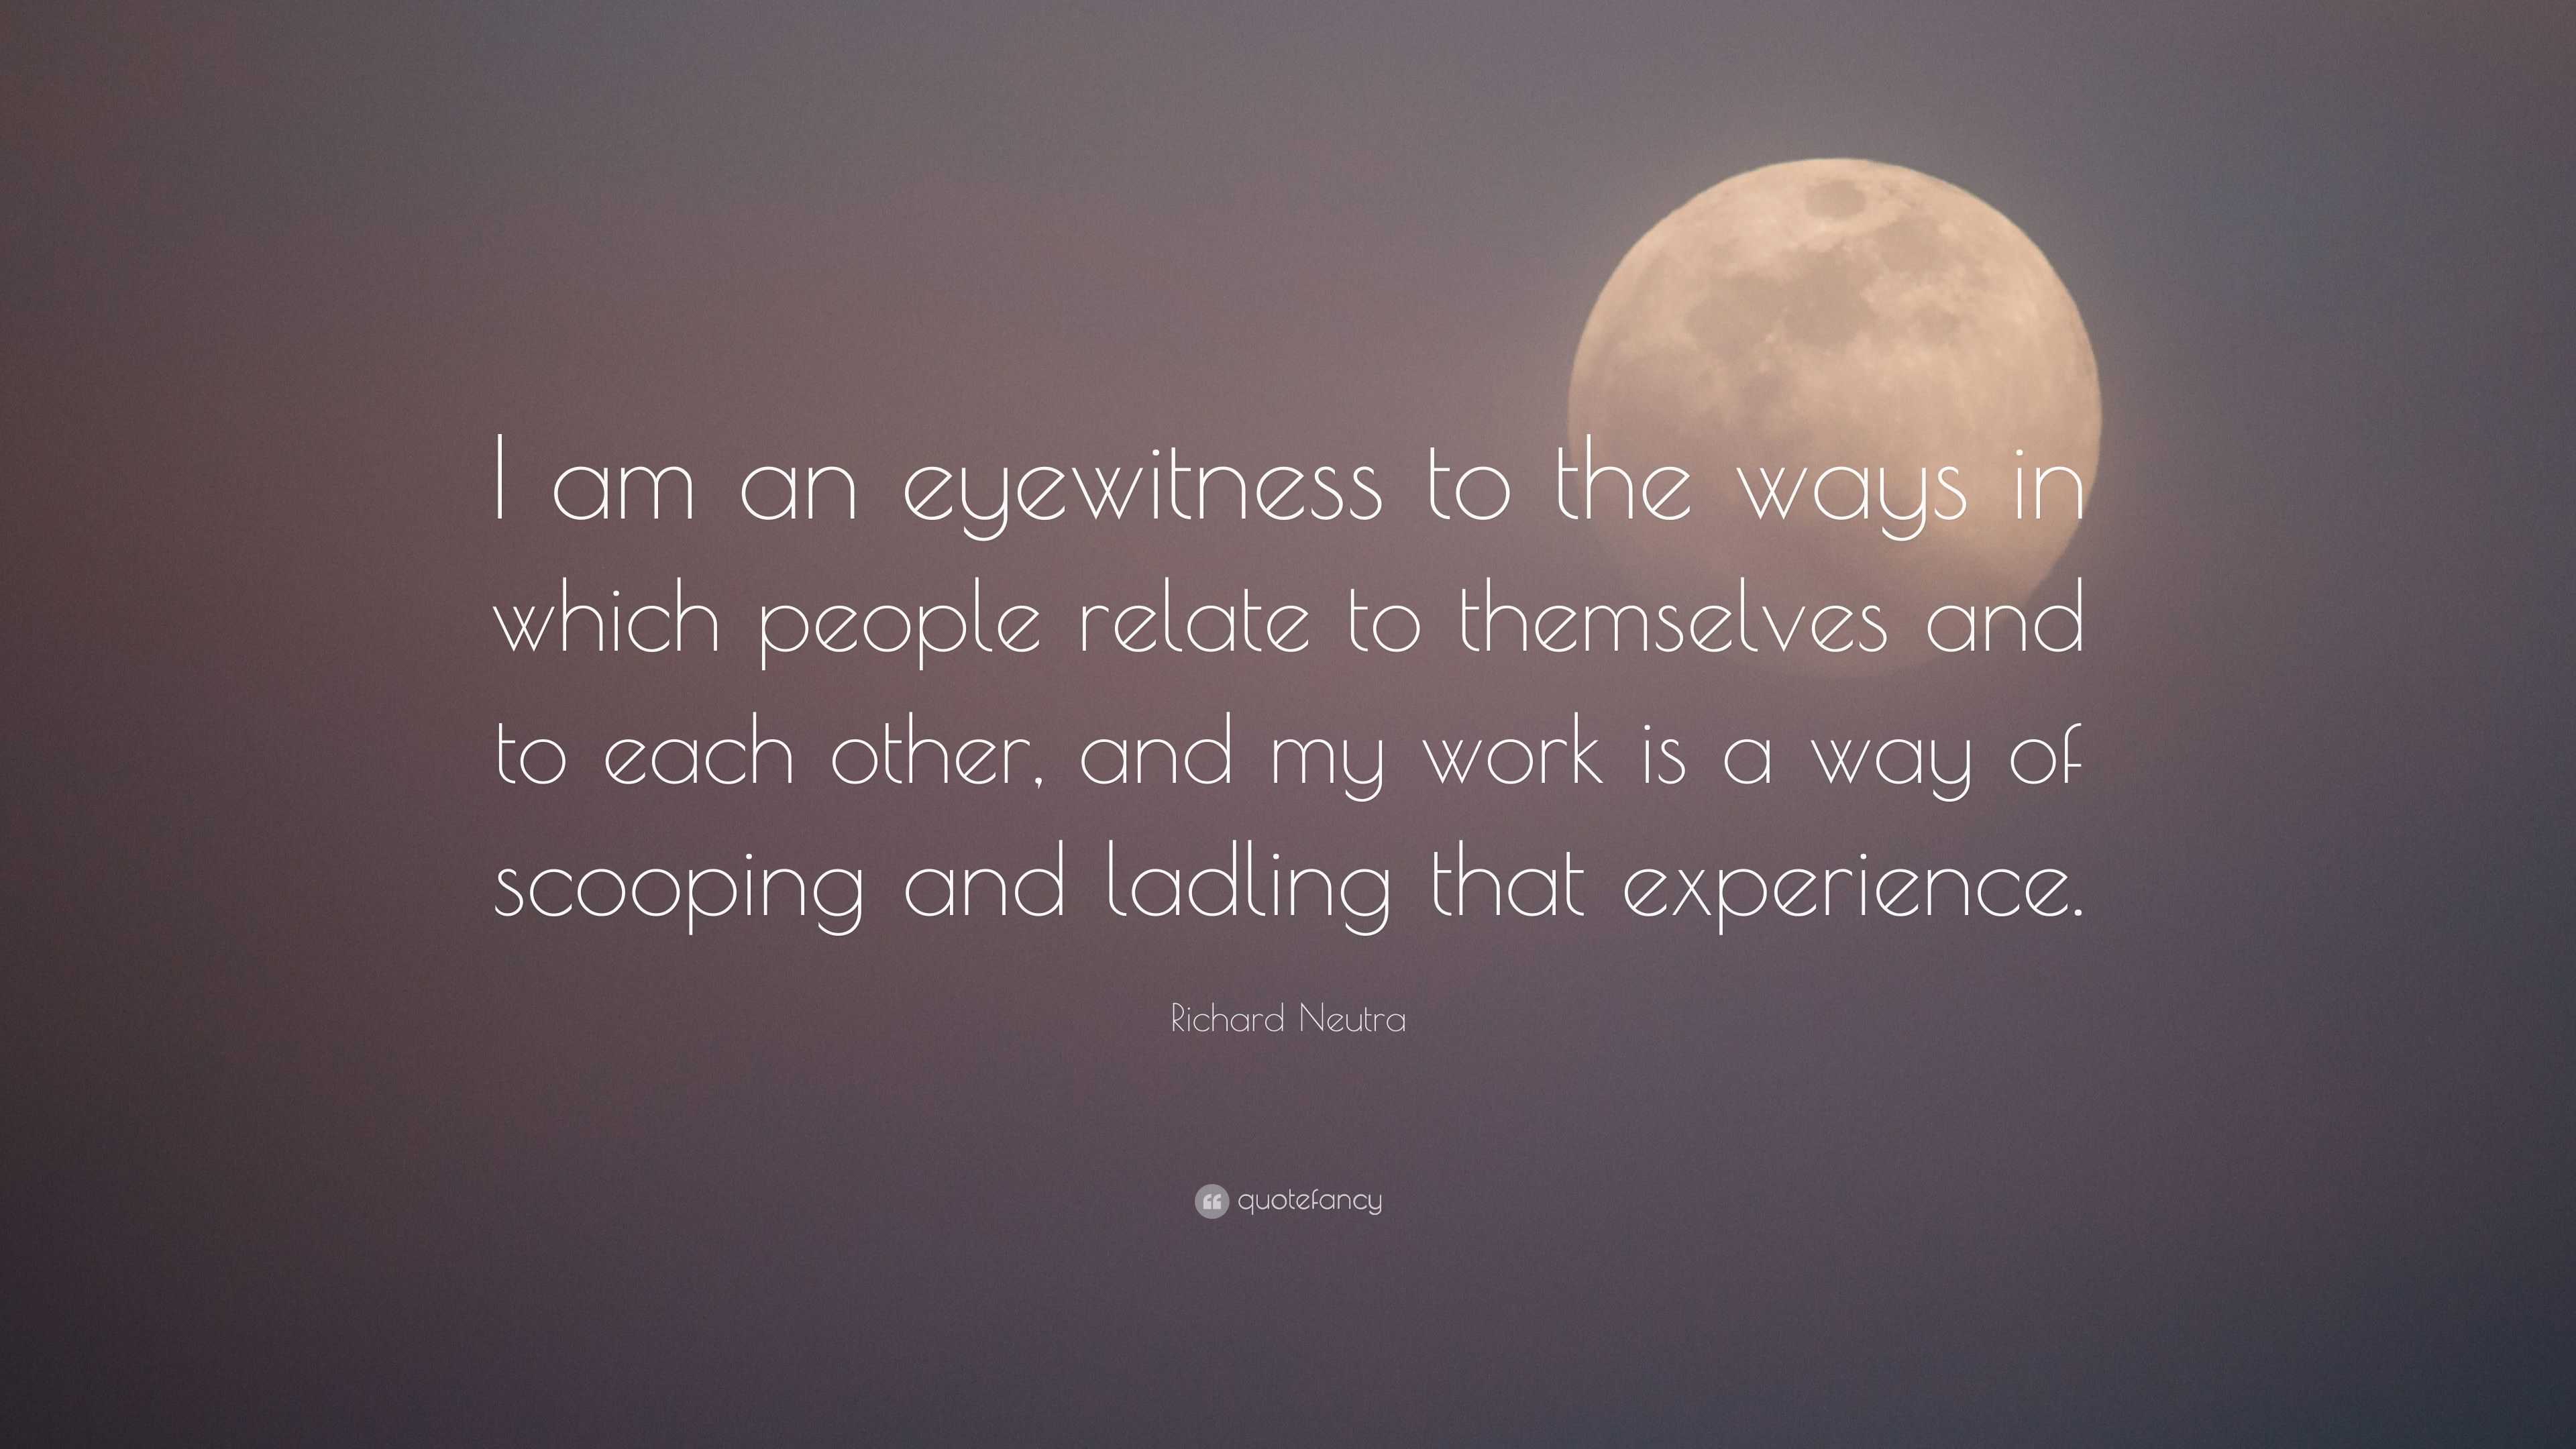 Richard Neutra Quote: “I am an eyewitness to the ways in which people ...